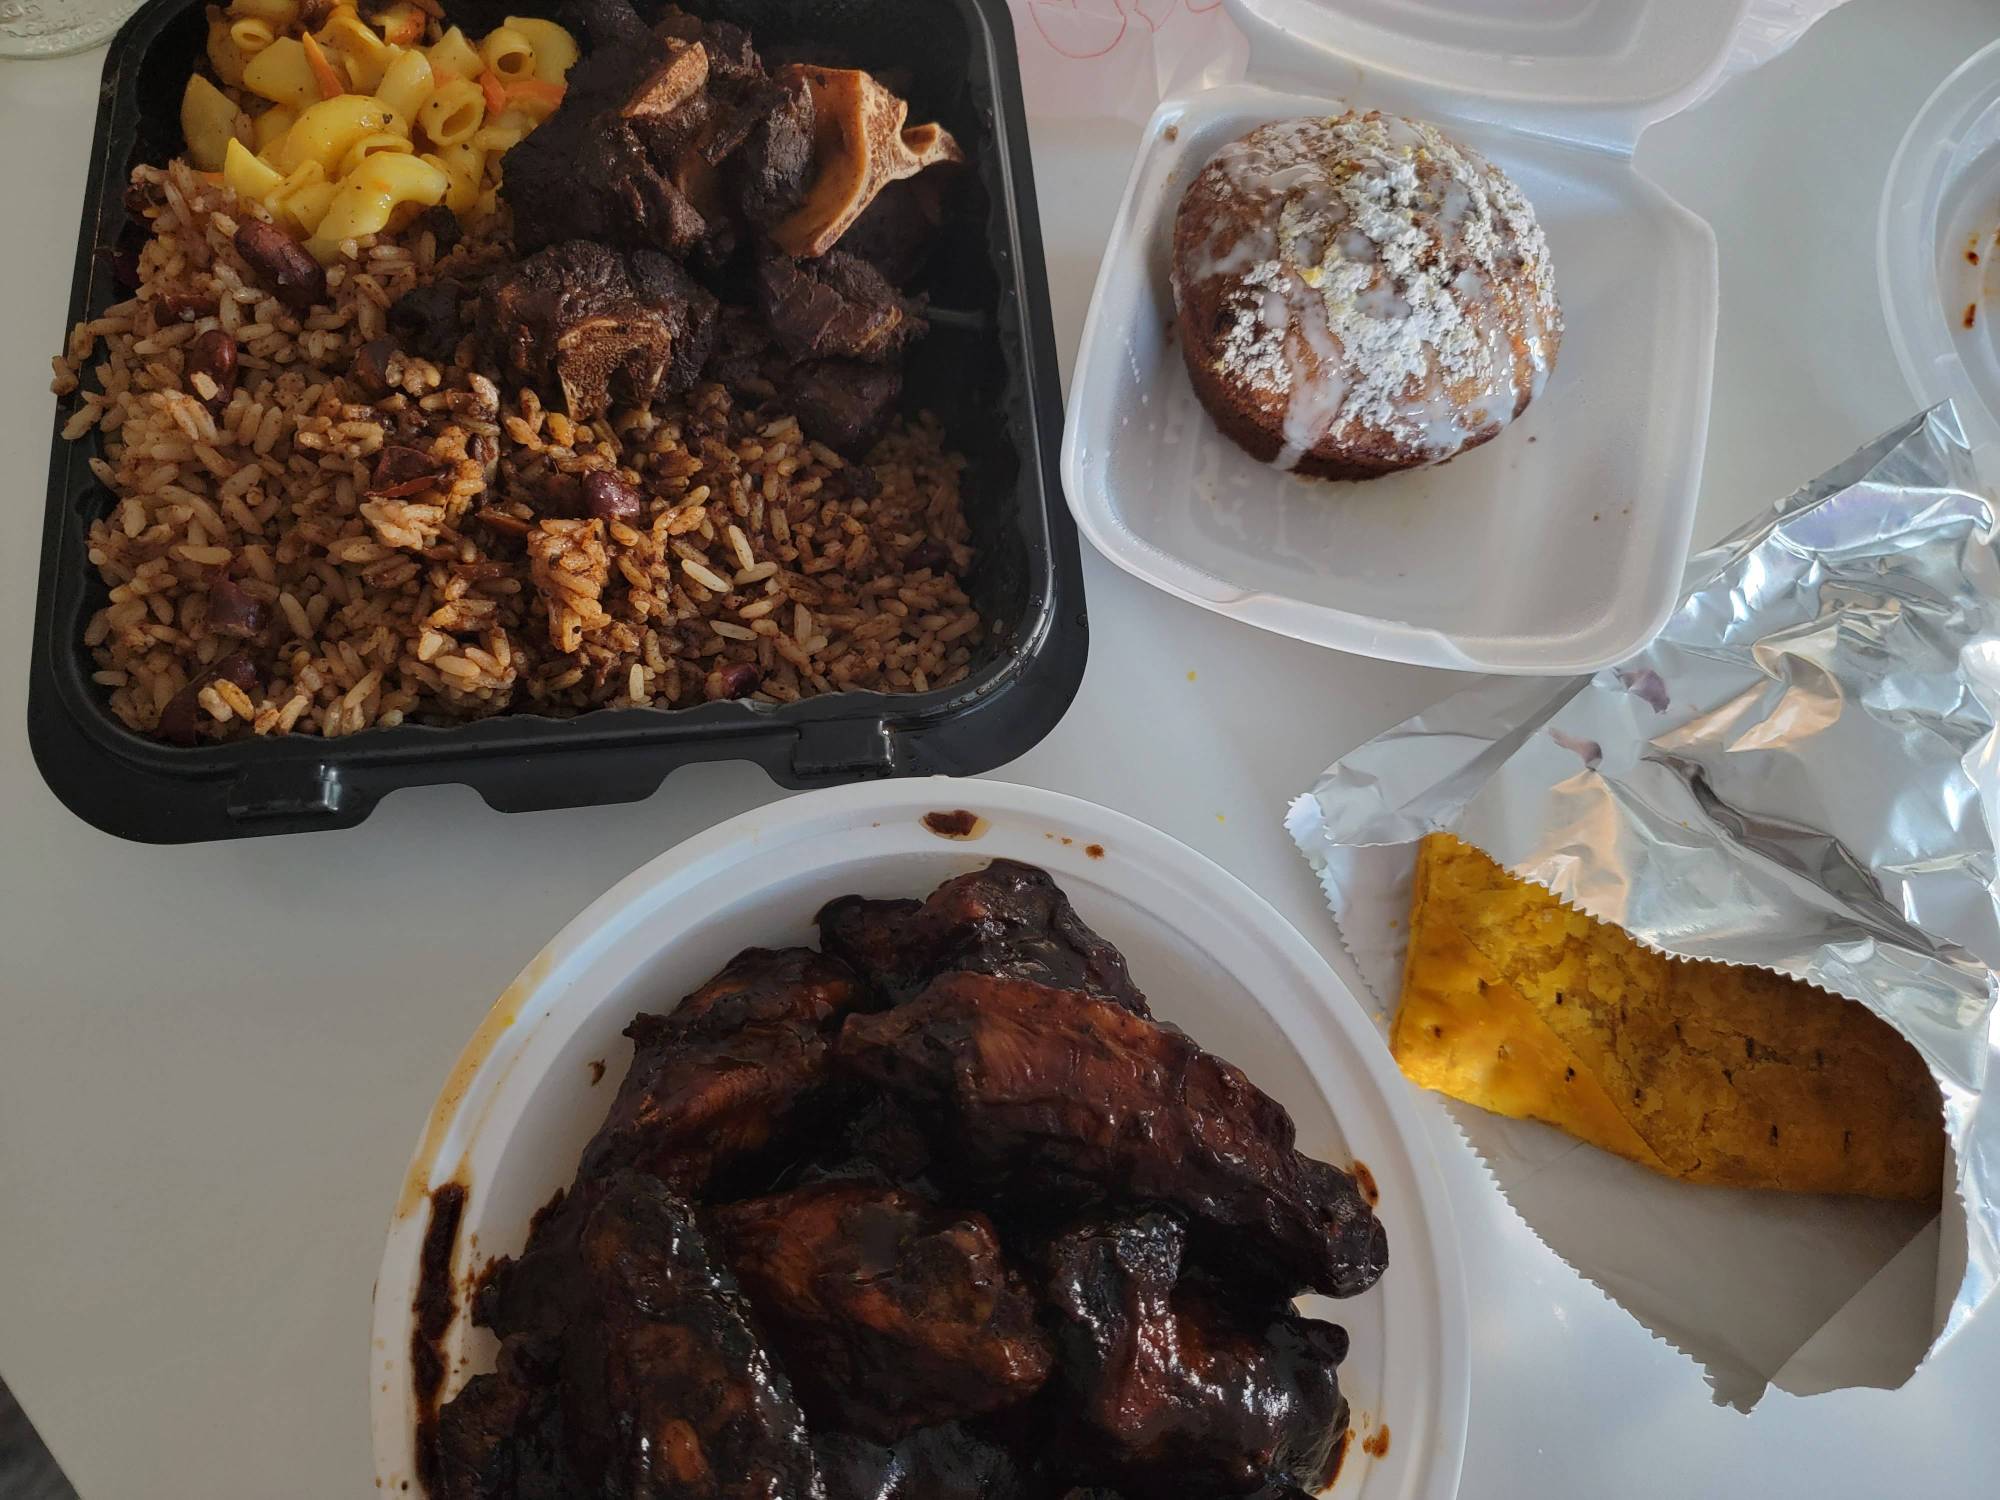 Find hearty Jamaican food at Las Vegas' House of Dutch Pot - Las